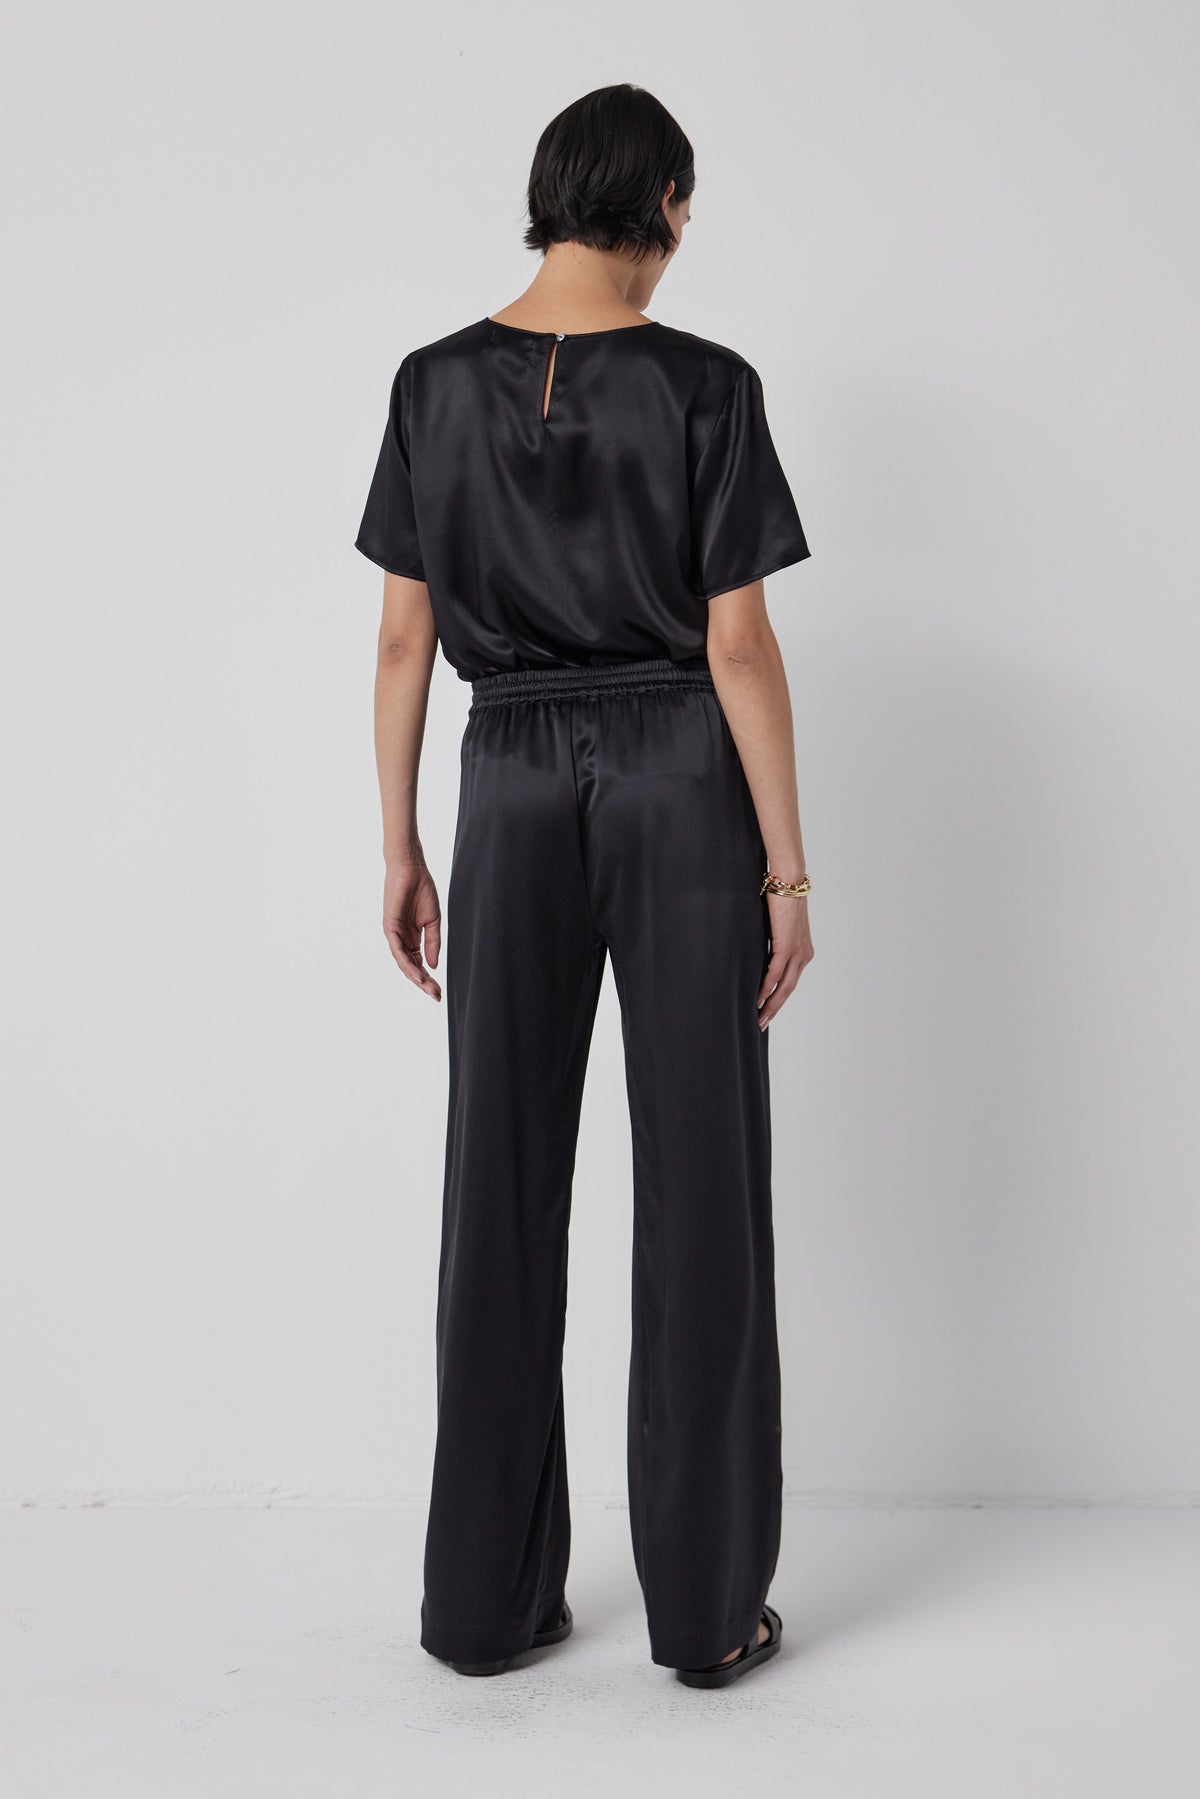 Woman from behind wearing a black silk charmeuse PASADENA TOP and matching trousers by Velvet by Jenny Graham, exuding timeless elegance.-36463793832129